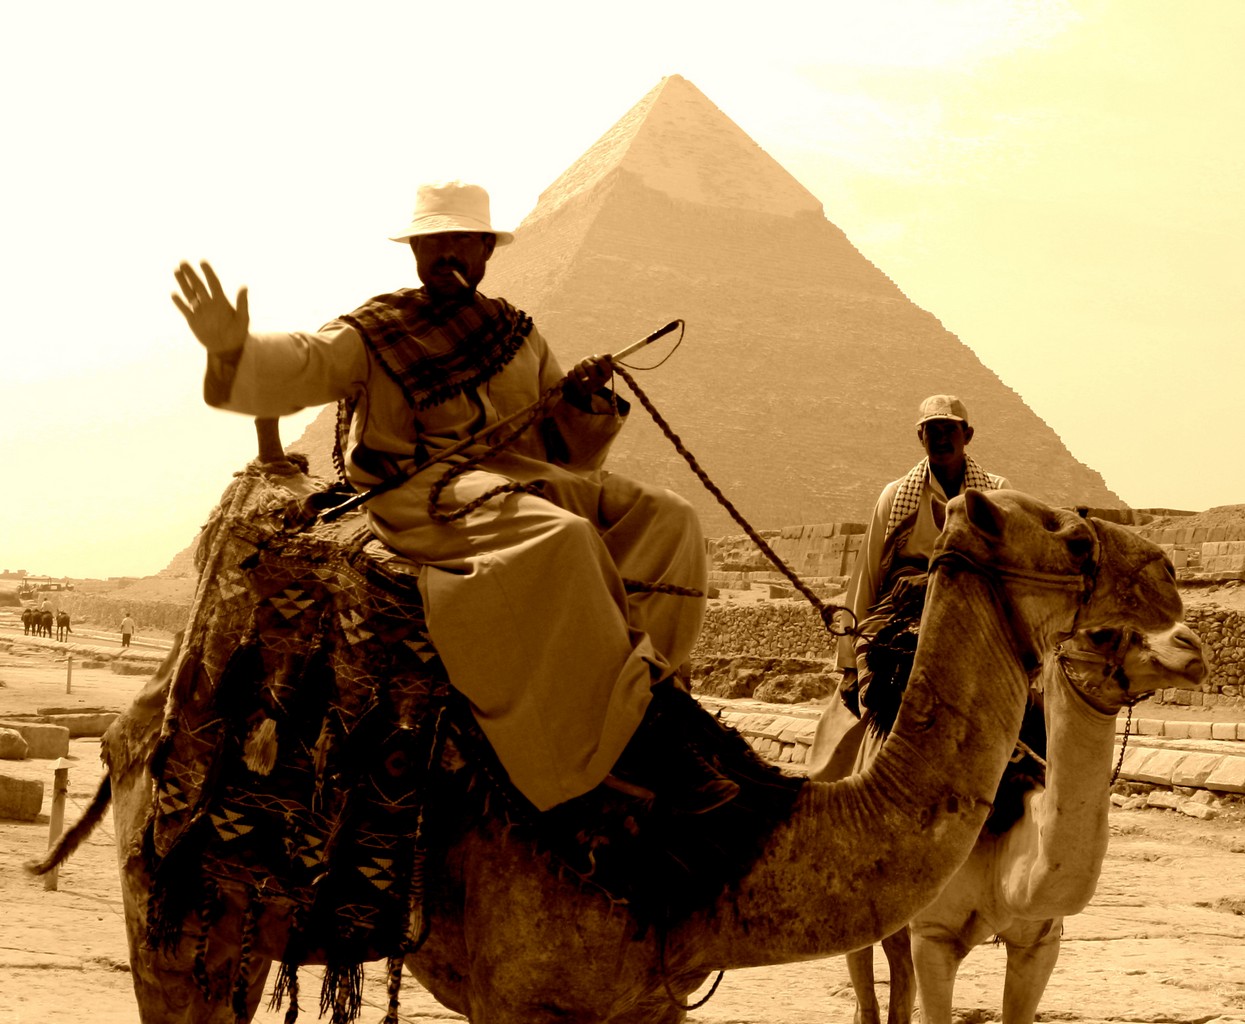 Camel ridden by tour guide in front of Pyramids at Giza